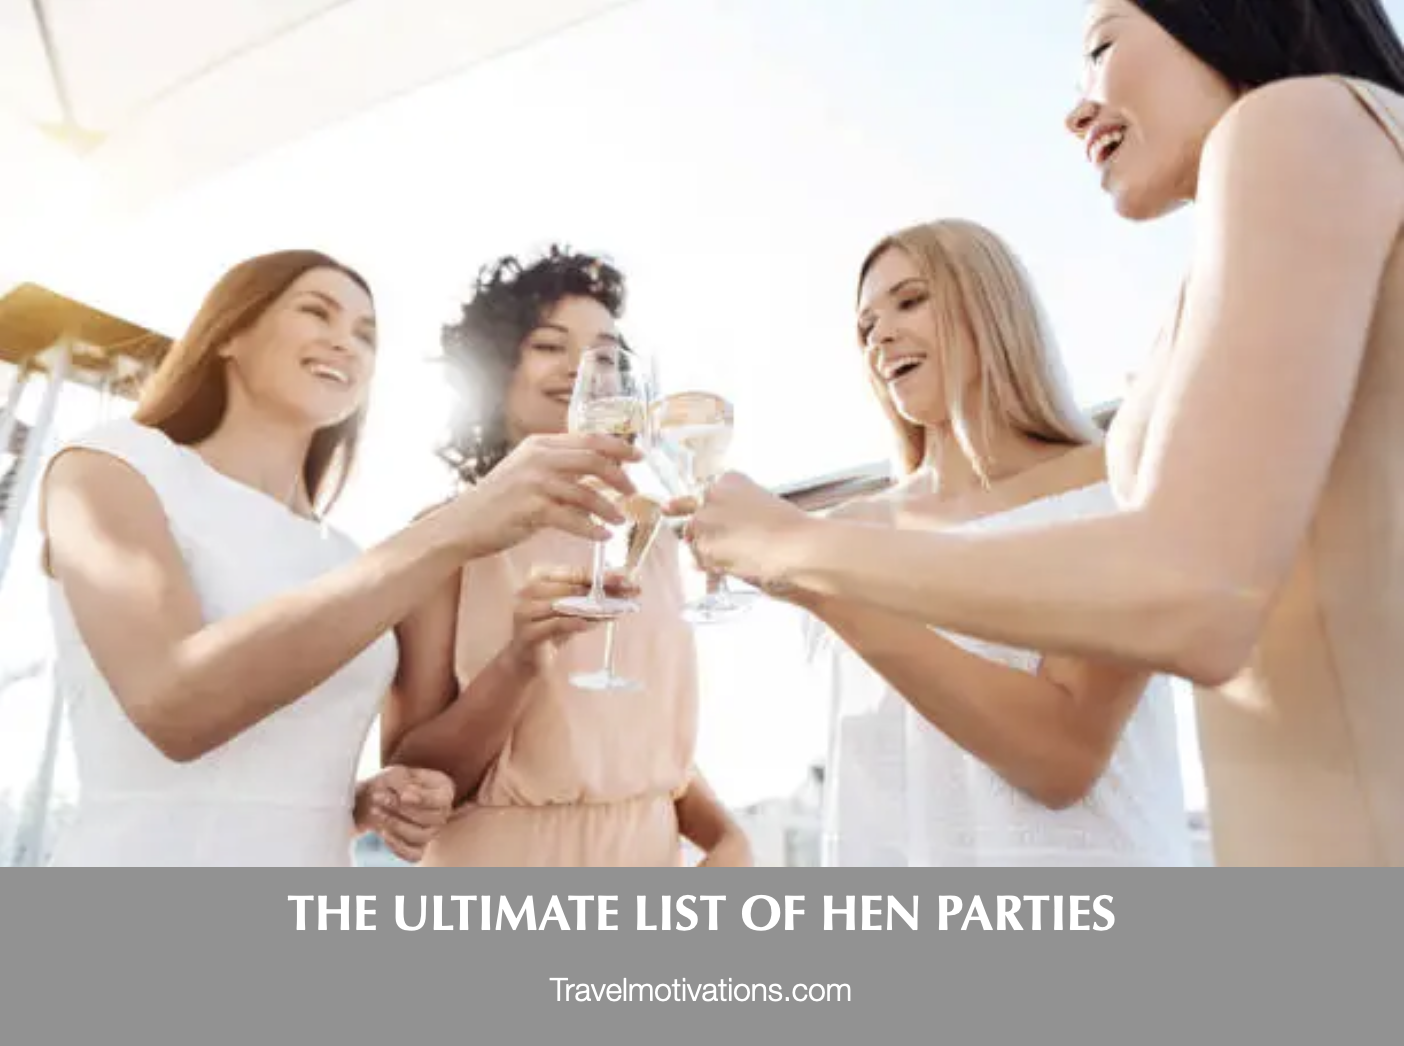 The ultimate list of hen parties